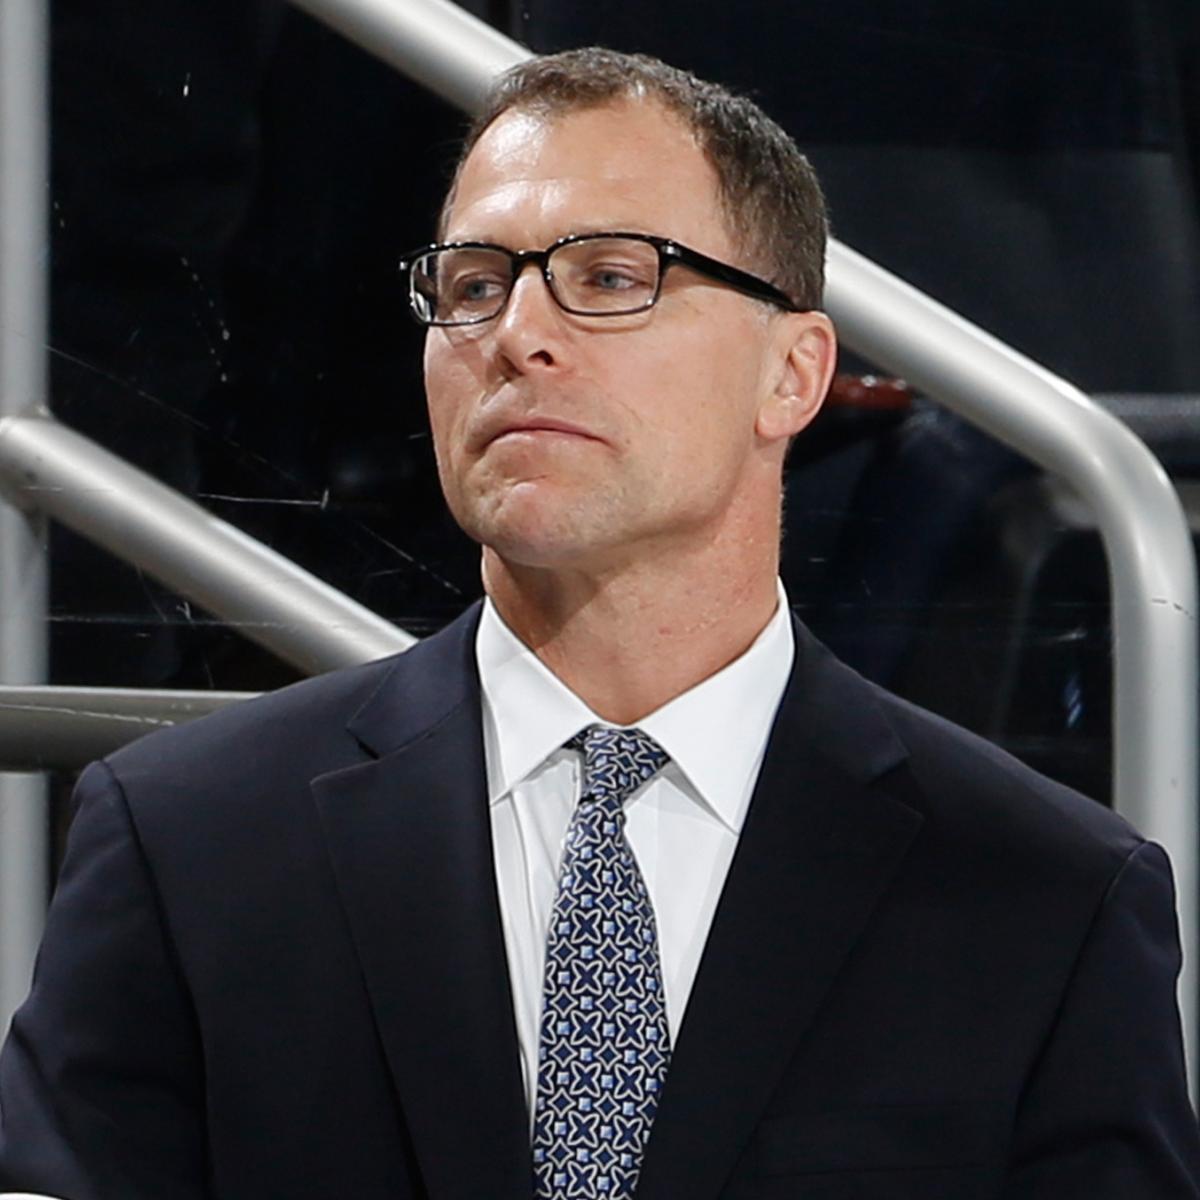 Scott Stevens Ready for Individual and Team Development In New Role with  Devils